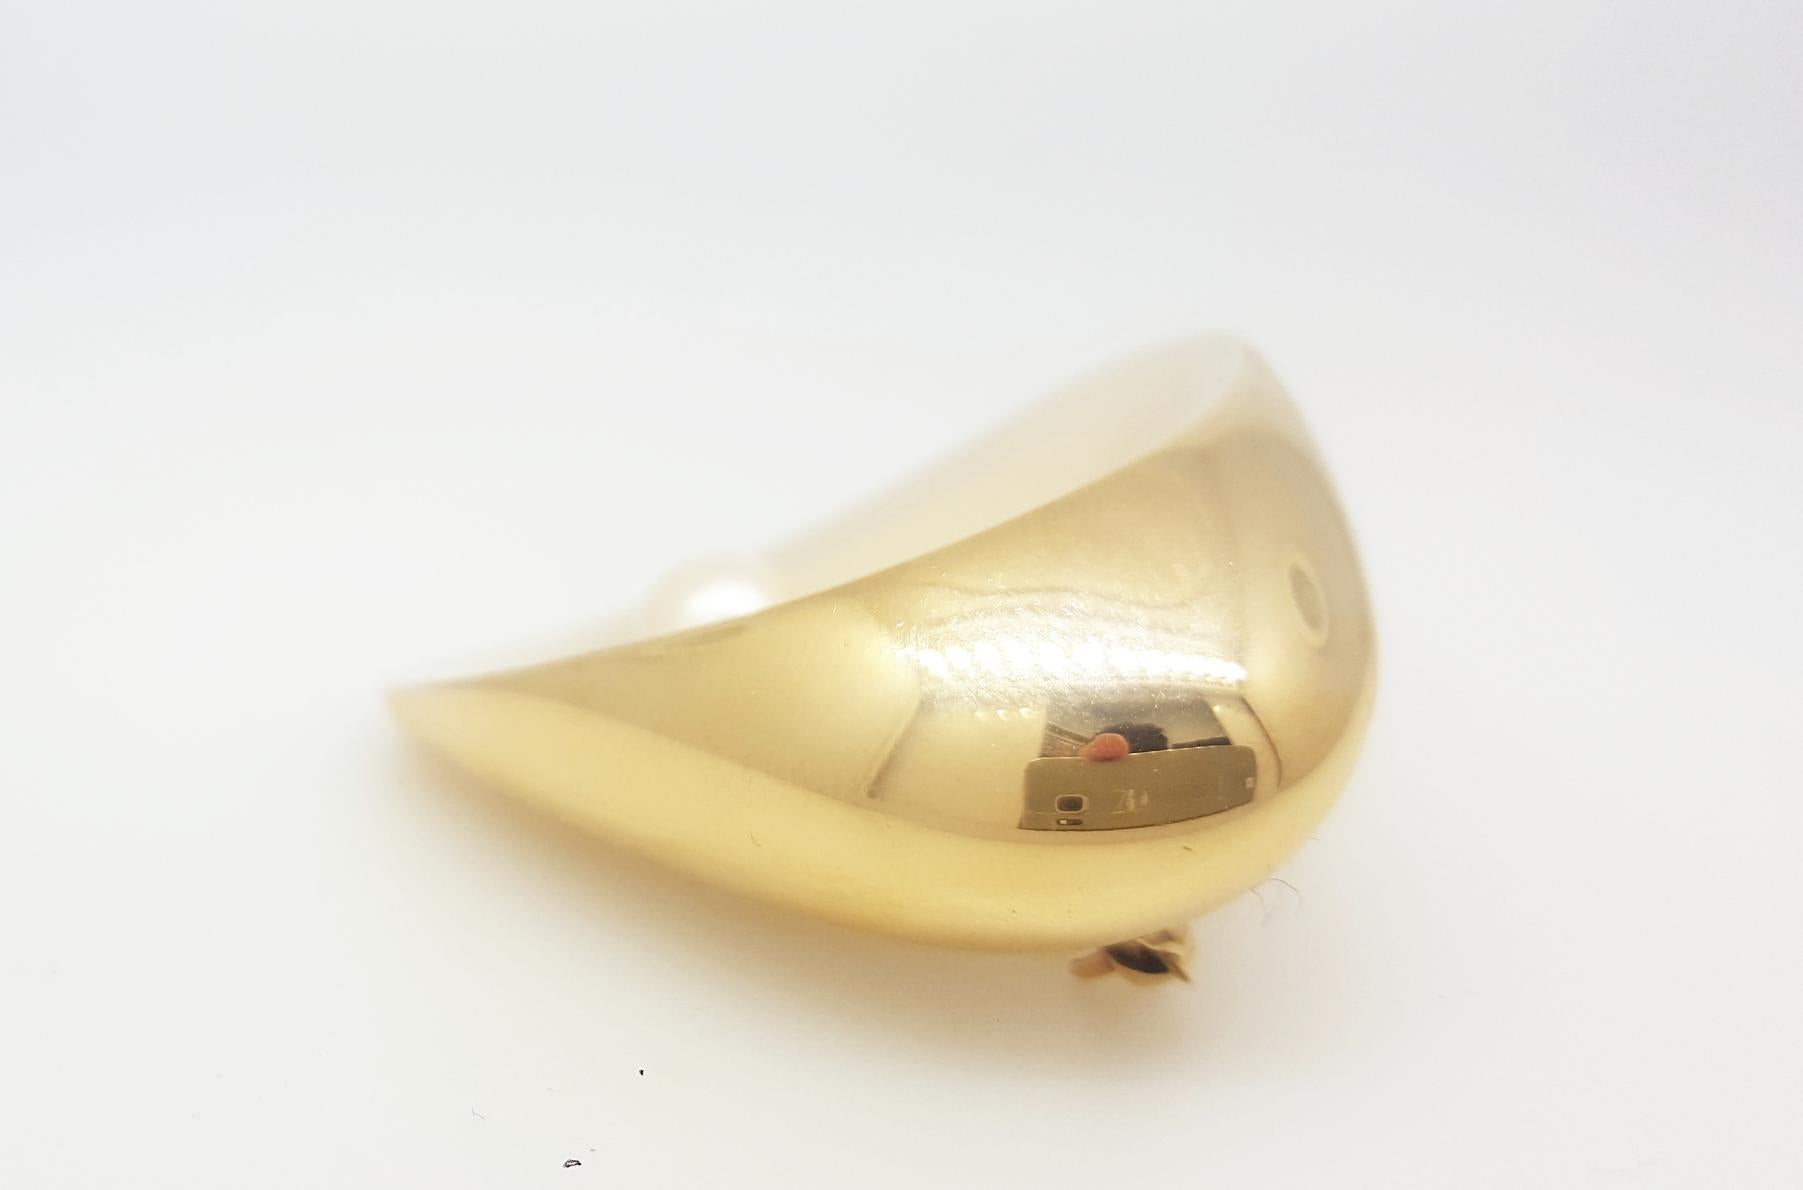 A Georg Jensen 18 karat yellow gold brooch designed by Nanna Ditzel for Georg Jensen. Circa 1956. Cultured Pearl approximately 7.0mm. The brooch measures 2.25 x 1.7 inches. Excellent Condition.